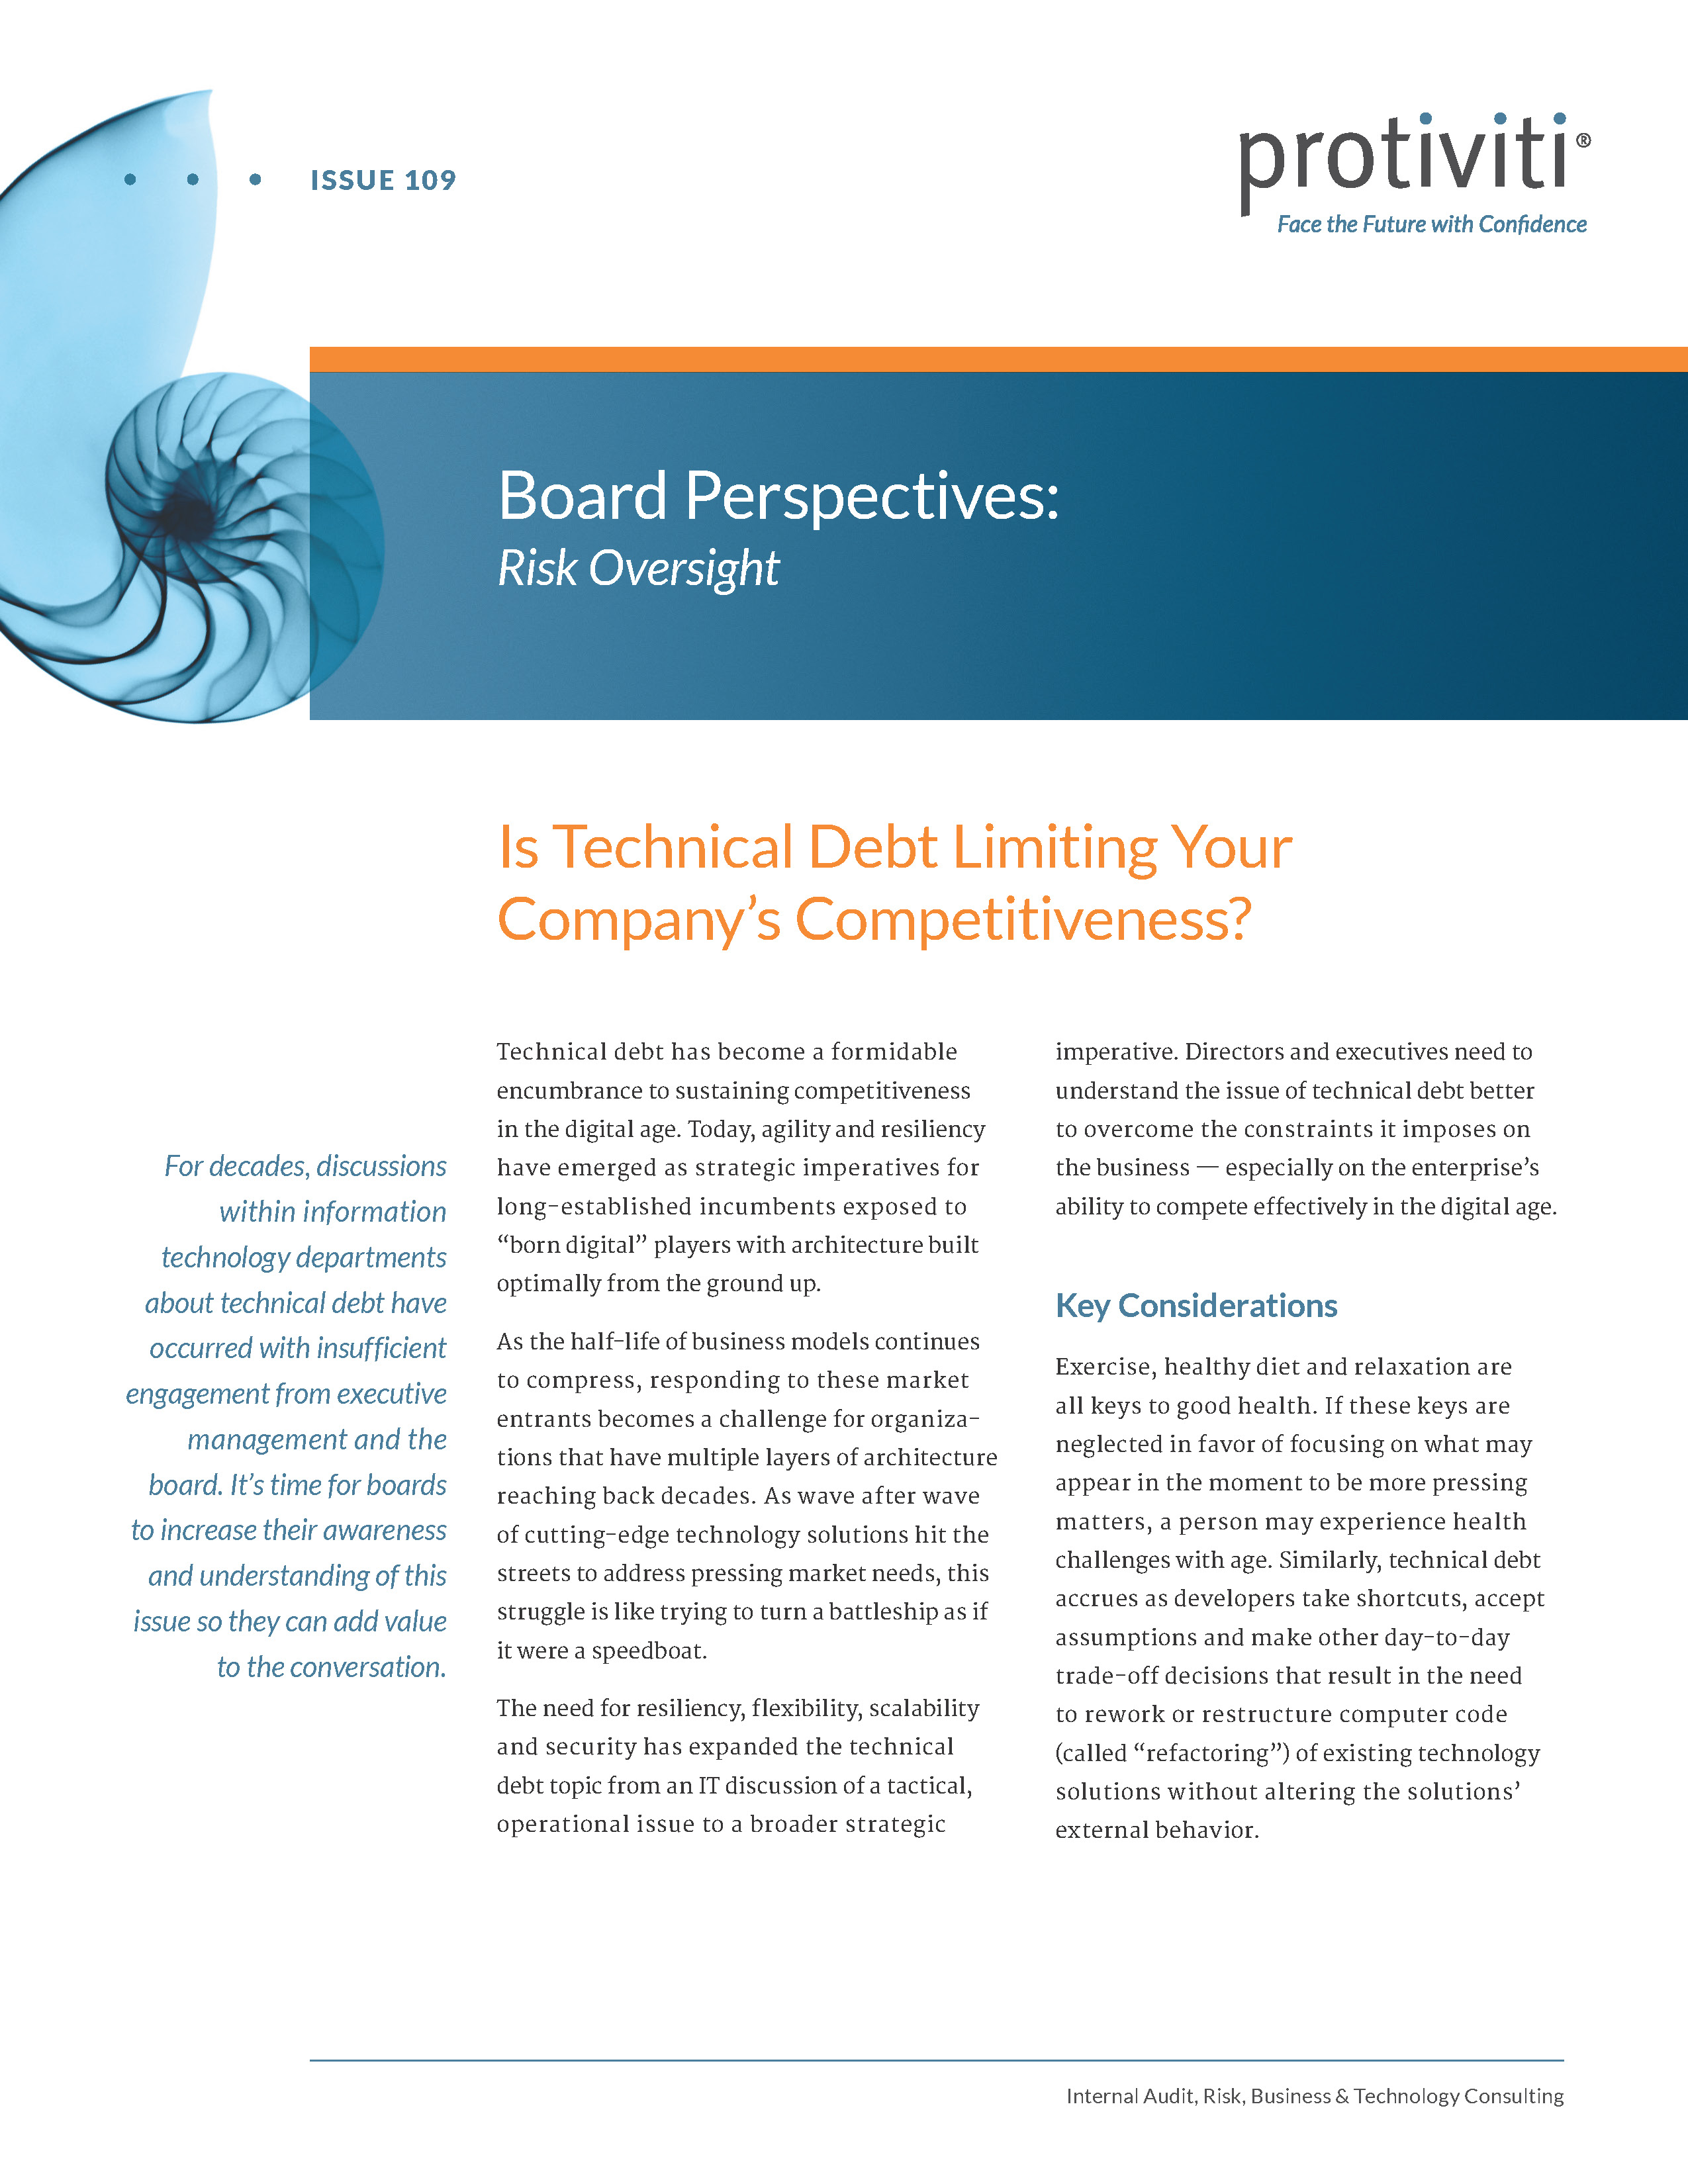 Screenshot of the first page of Is Technical Debt Limiting Your Company’s Competitiveness